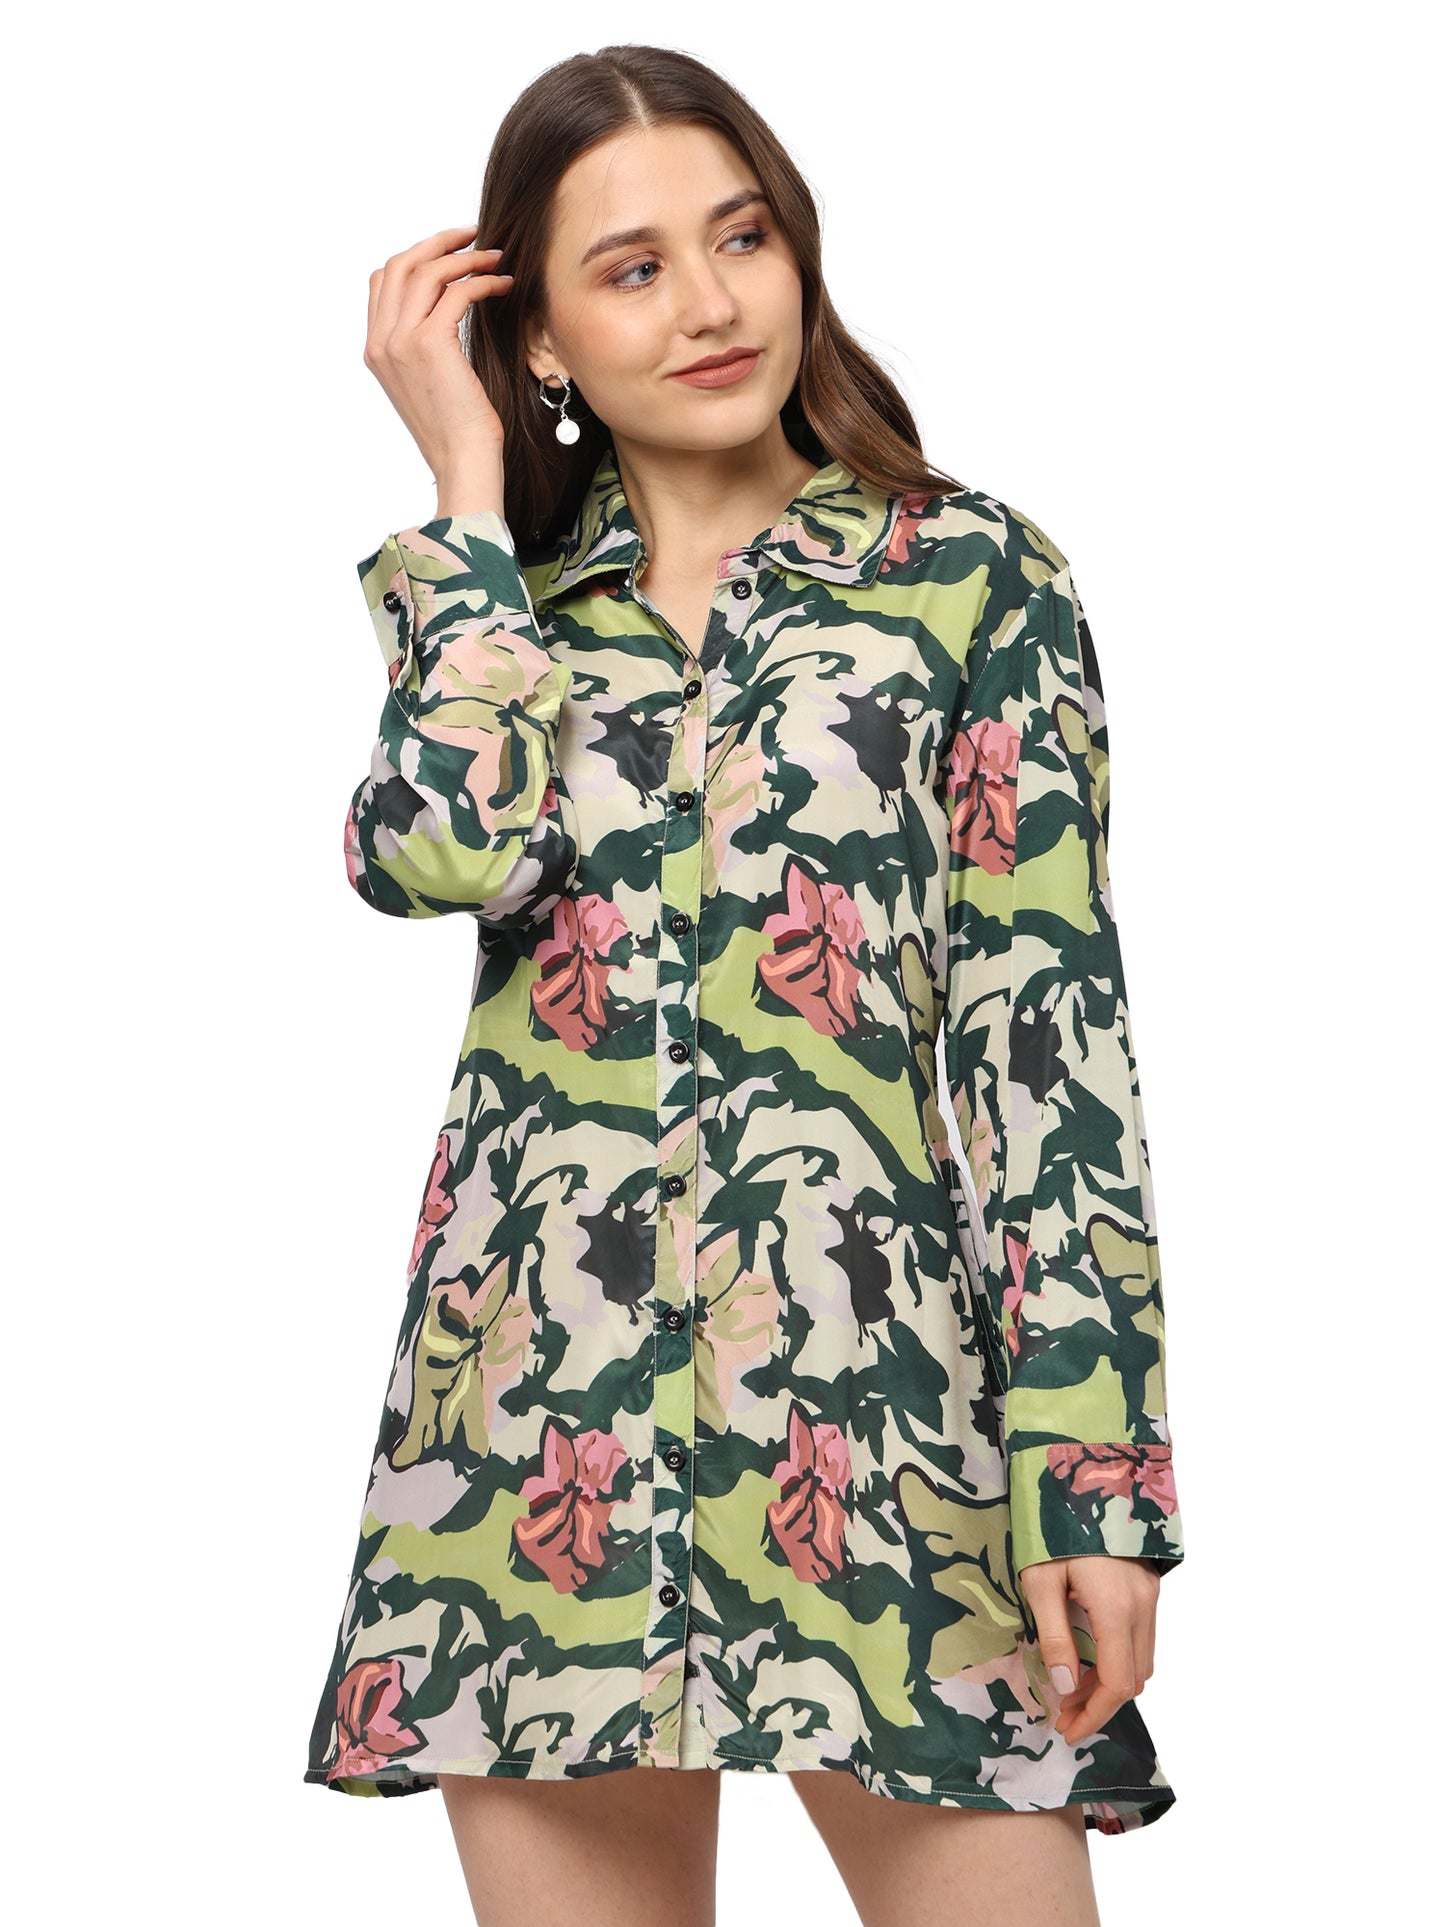 Yash Gallery Women's Green Polyester Floral Printed Tunic Dress